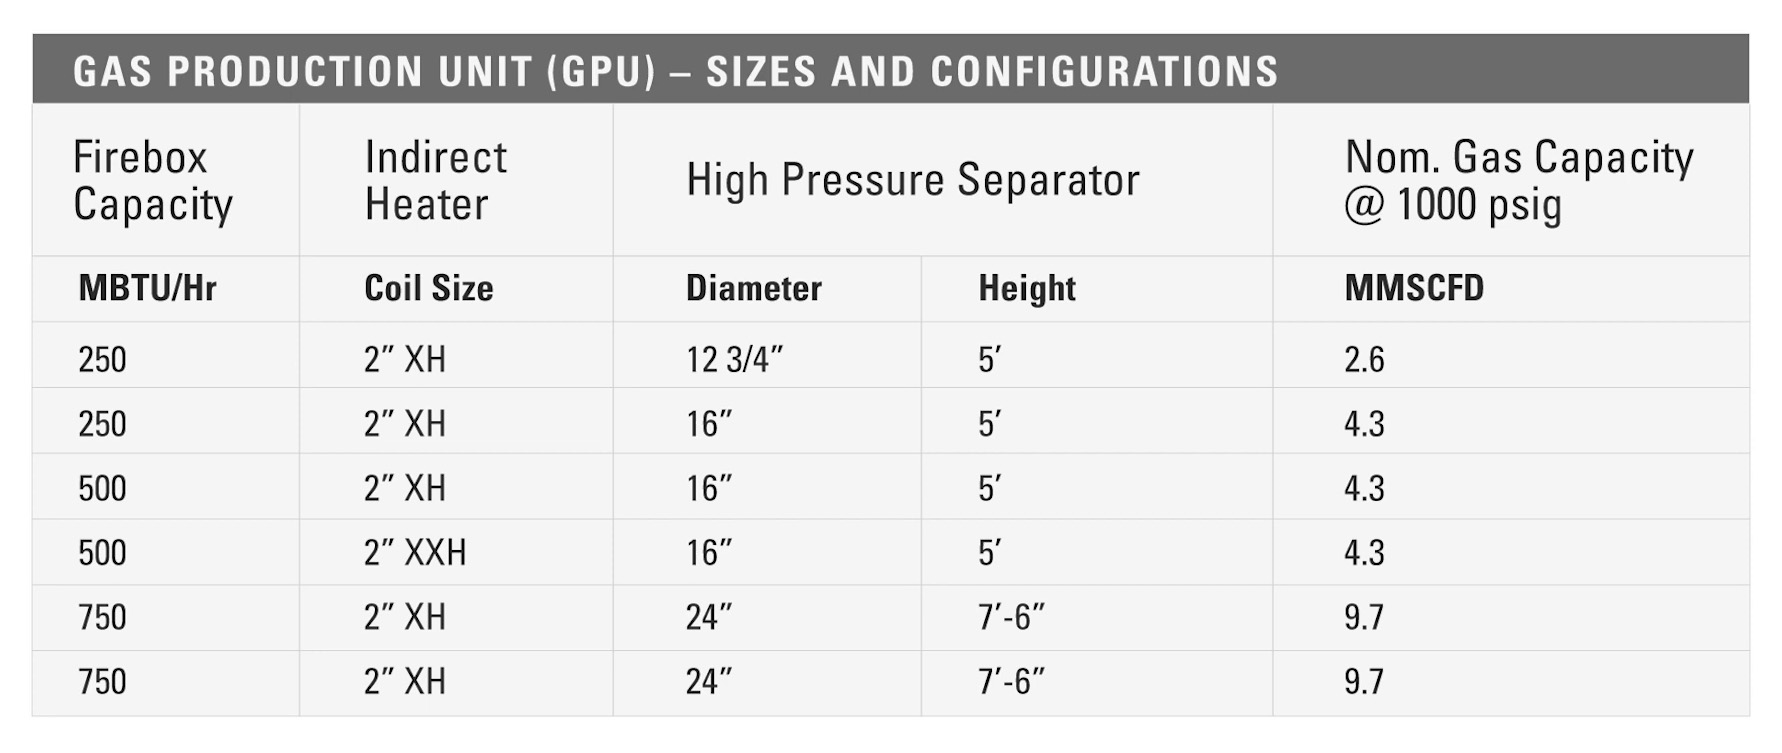 Gas Production Unit Sizes and Configurations